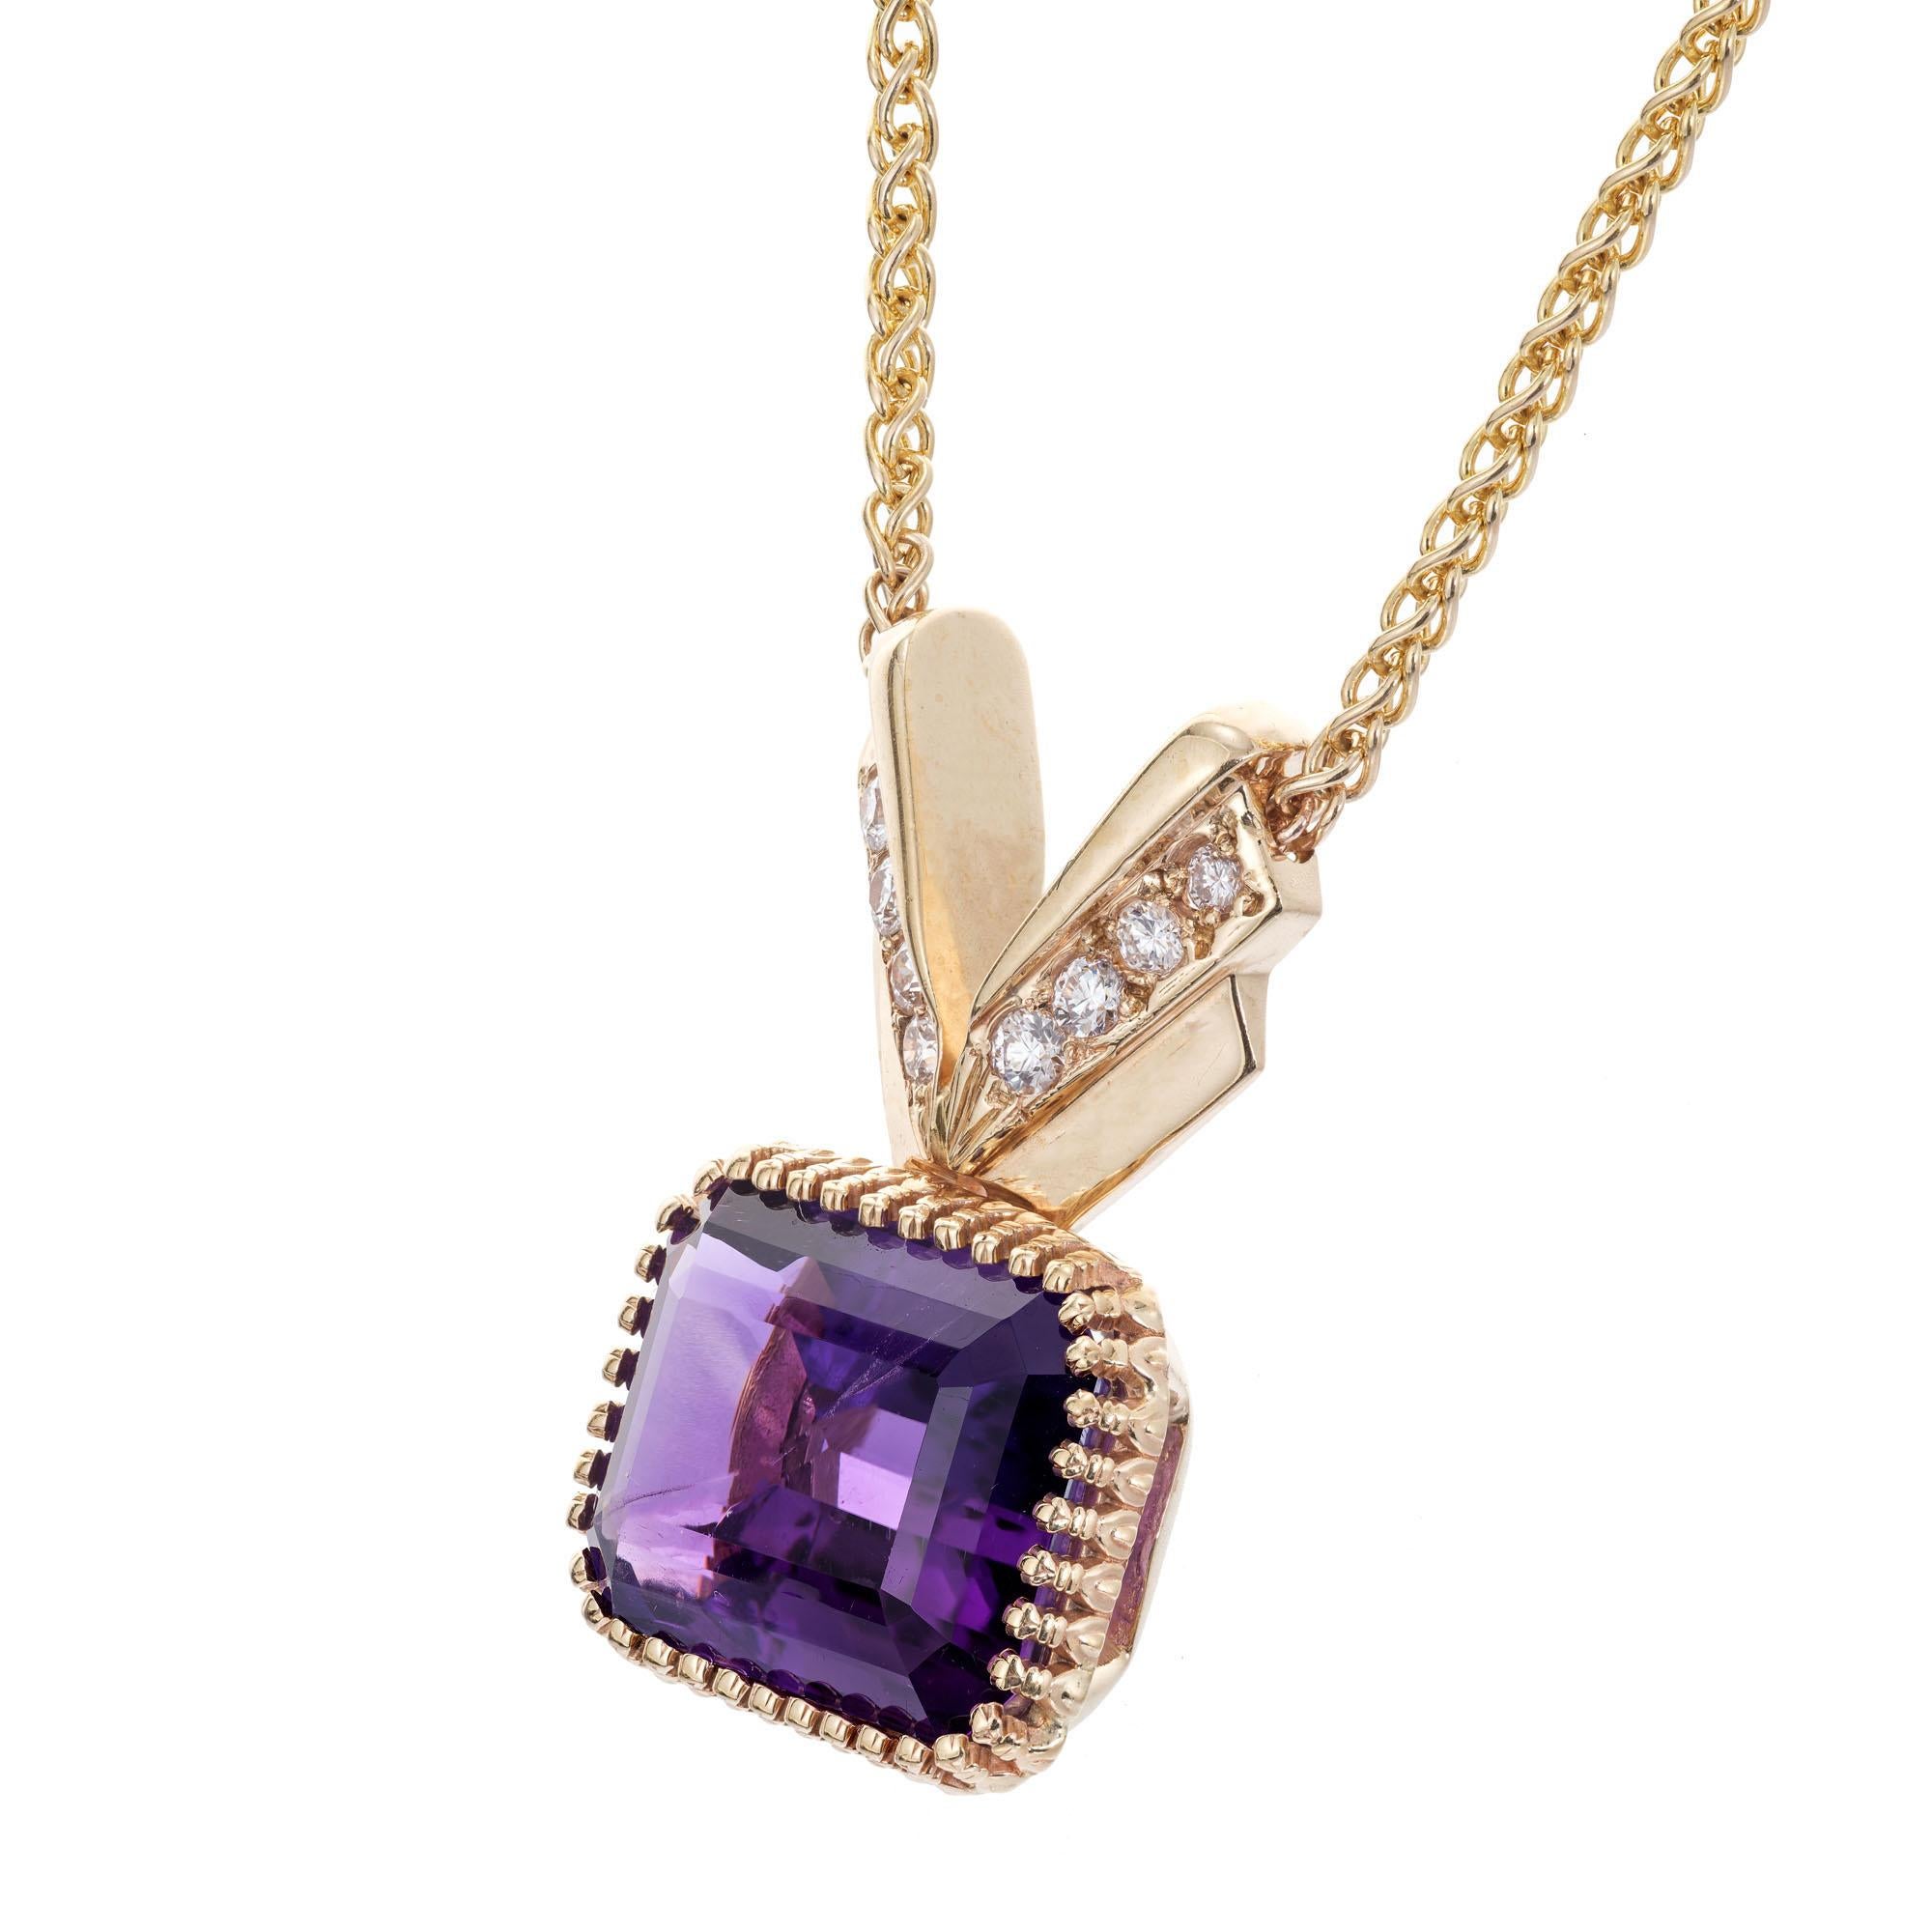 Deep bright purple Amethyst and diamond pendant necklace. Emerald cut amethyst set in 14k yellow gold with 8 round accent diamonds. 20 inch wheat chain. 

1 emerald cut Amethyst approx. total weight 17.00cts
8 round diamonds approx. total weight